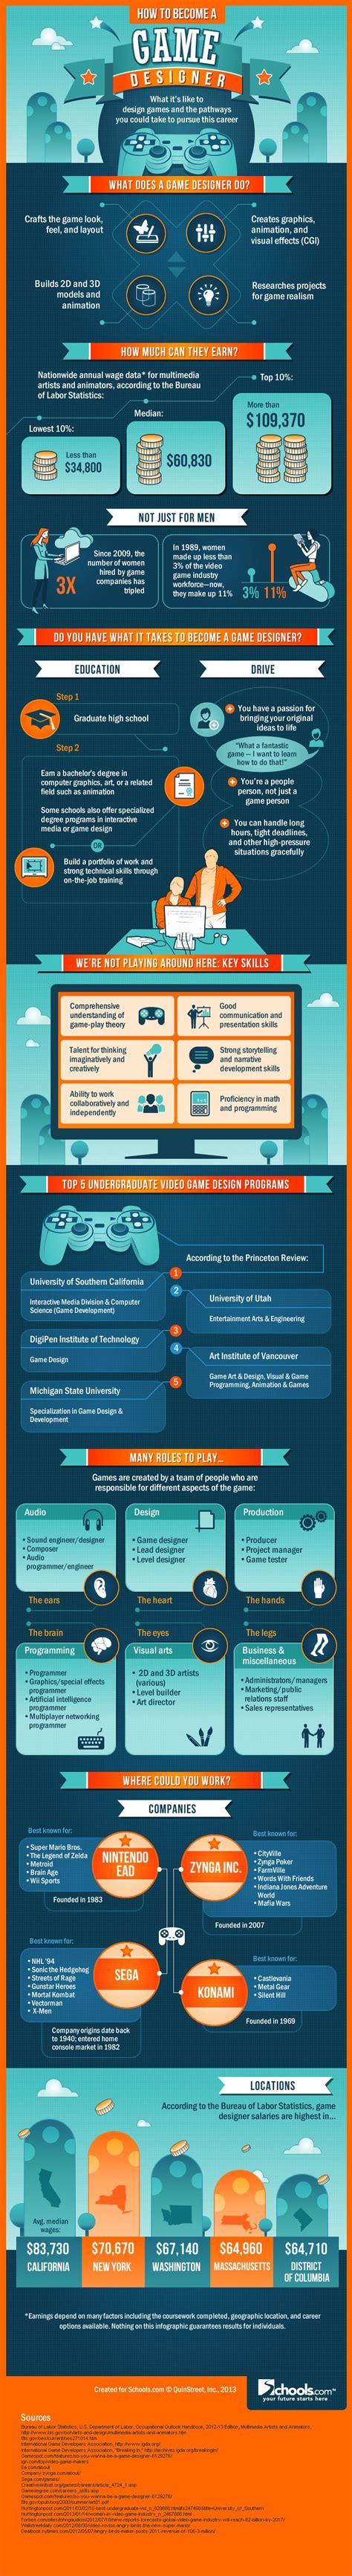 How To Become A Game Designer Game Design Video Game